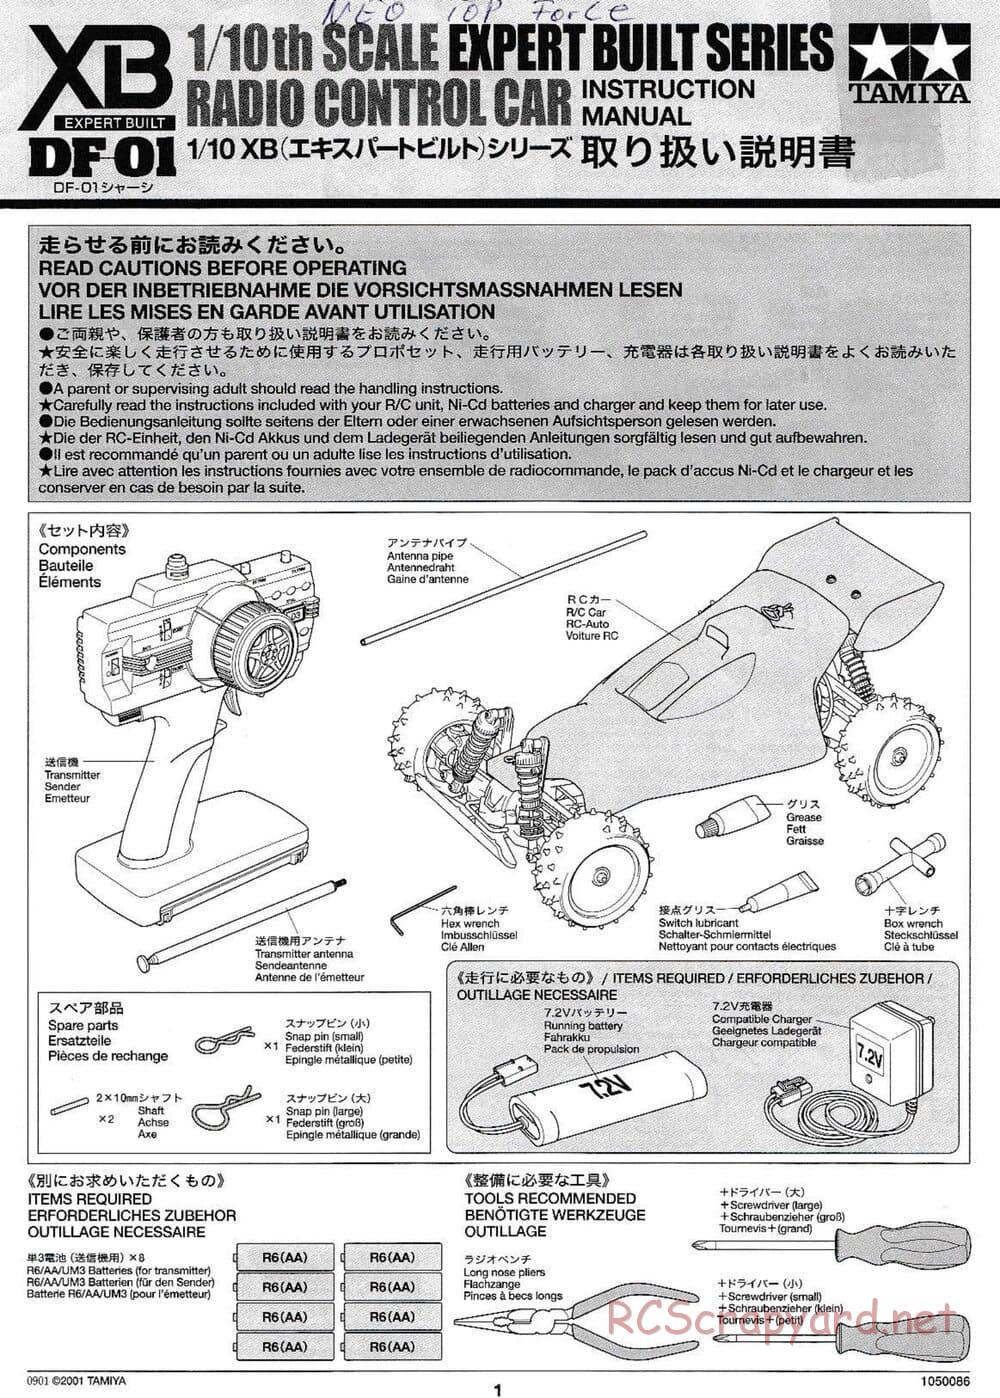 Tamiya - XB Neo Top-Force - DF-01 Chassis - Manual - Page 1